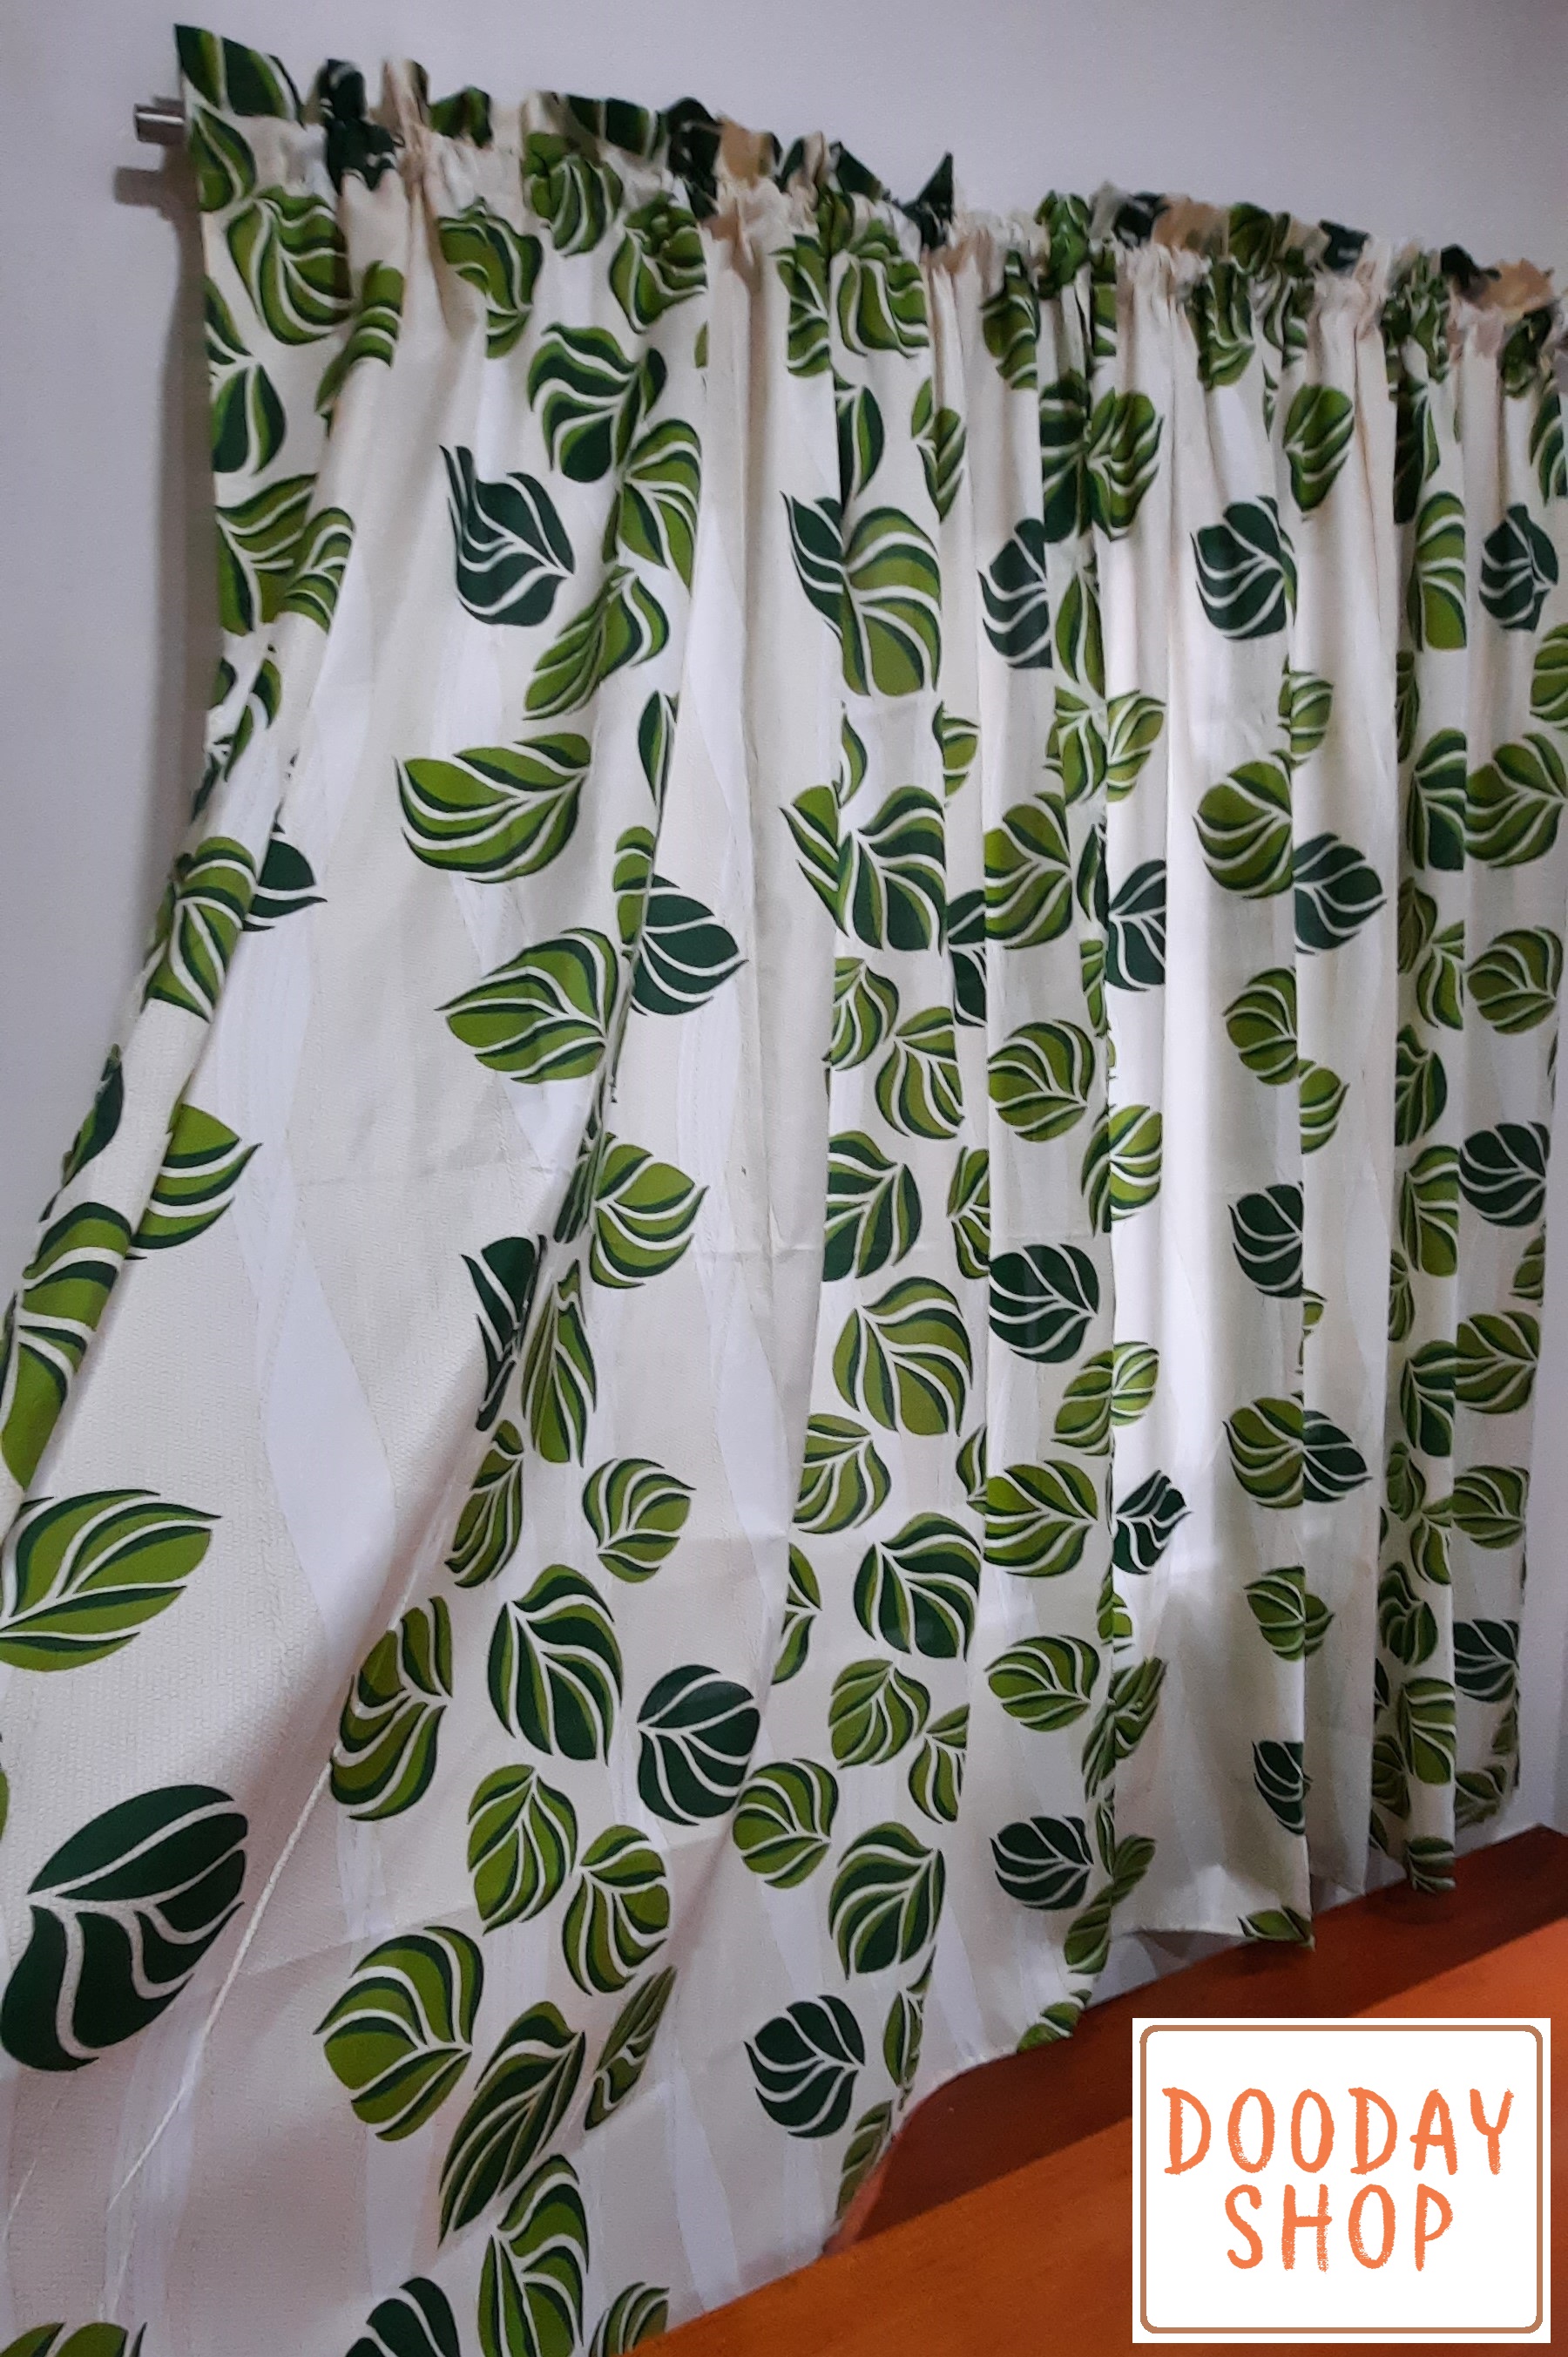 How to Hang Curtains Without Drilling: 2 Solutions